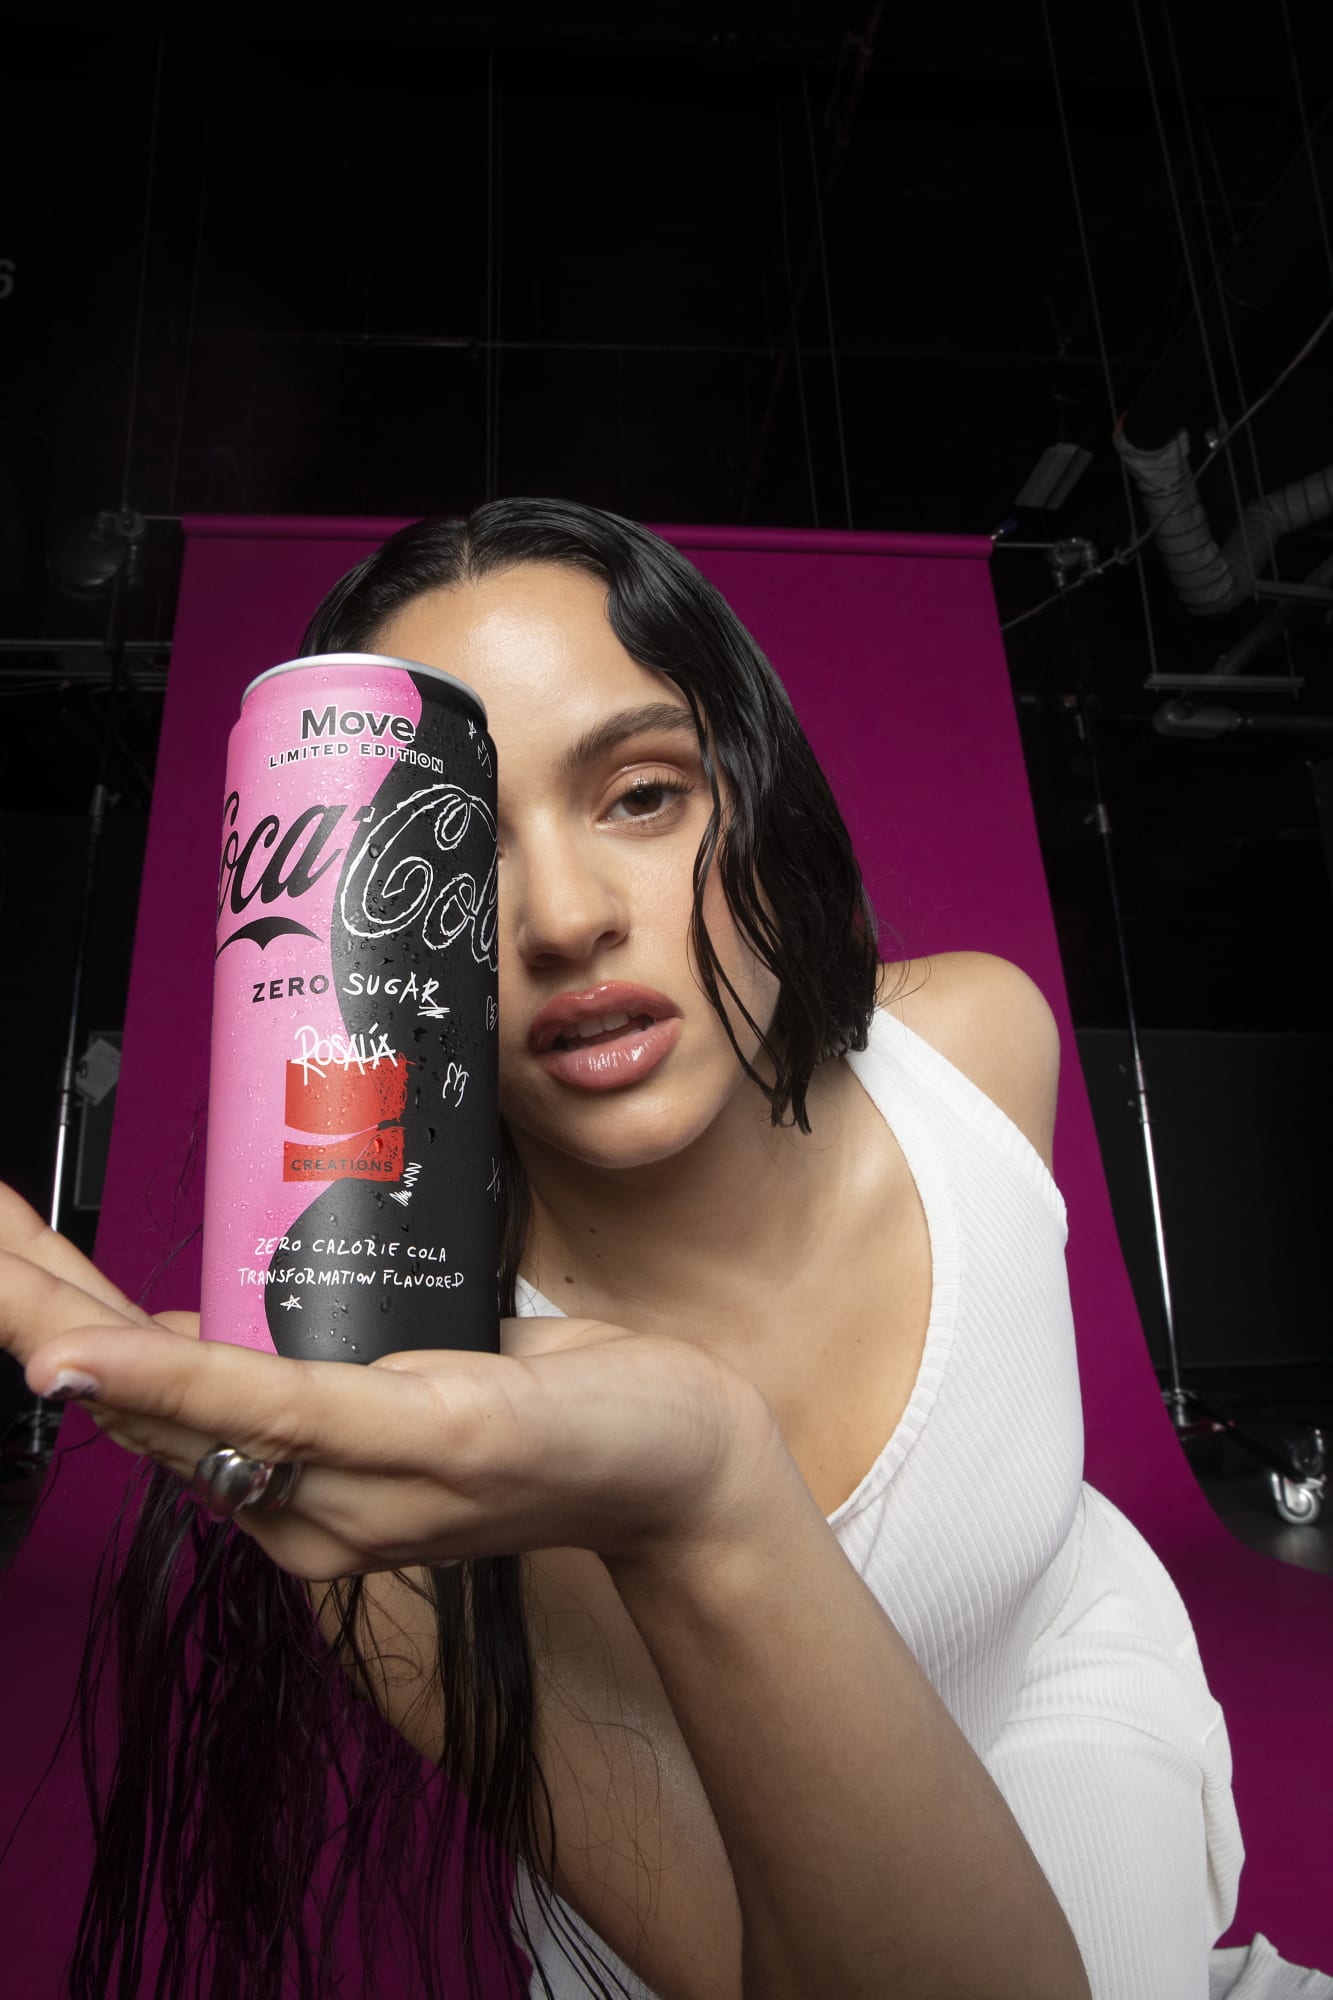 CocaCola Move celebrates selfexpression with a powerful new flavor